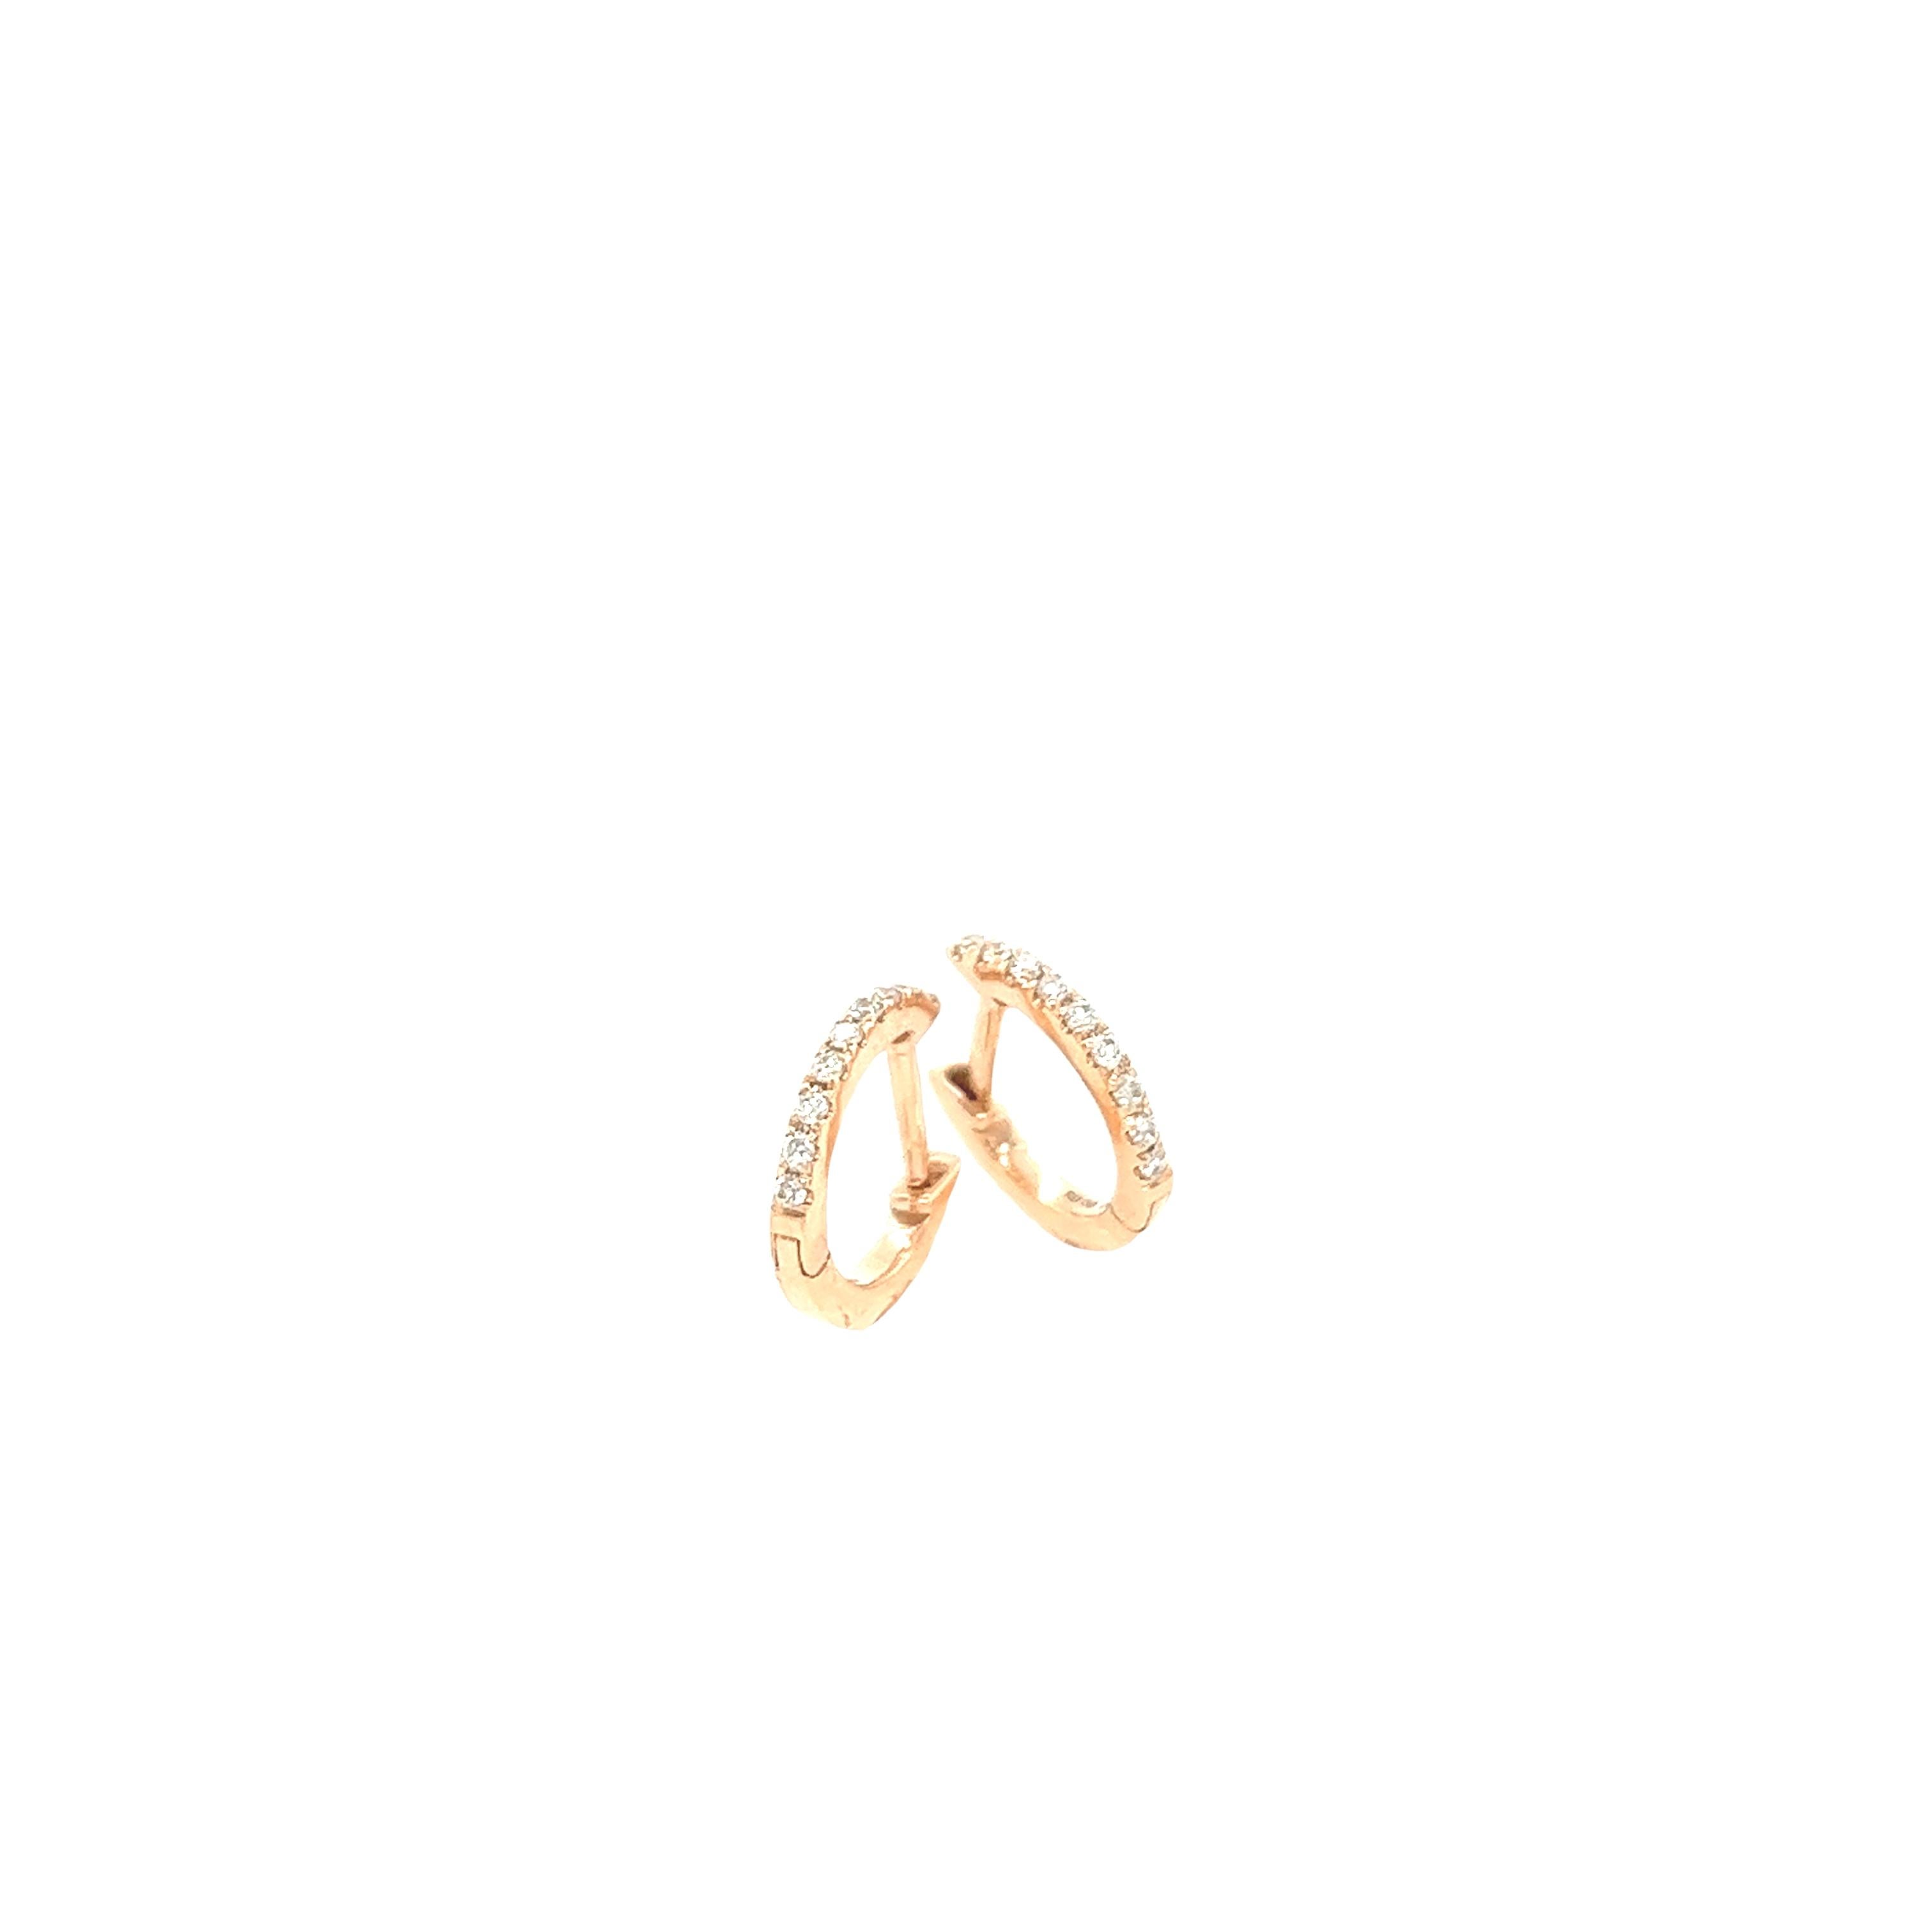 18ct Rose Gold Diamond Hoop Earrings, Set With 0.08ct Of Round Diamonds, 9mm For Sale 2